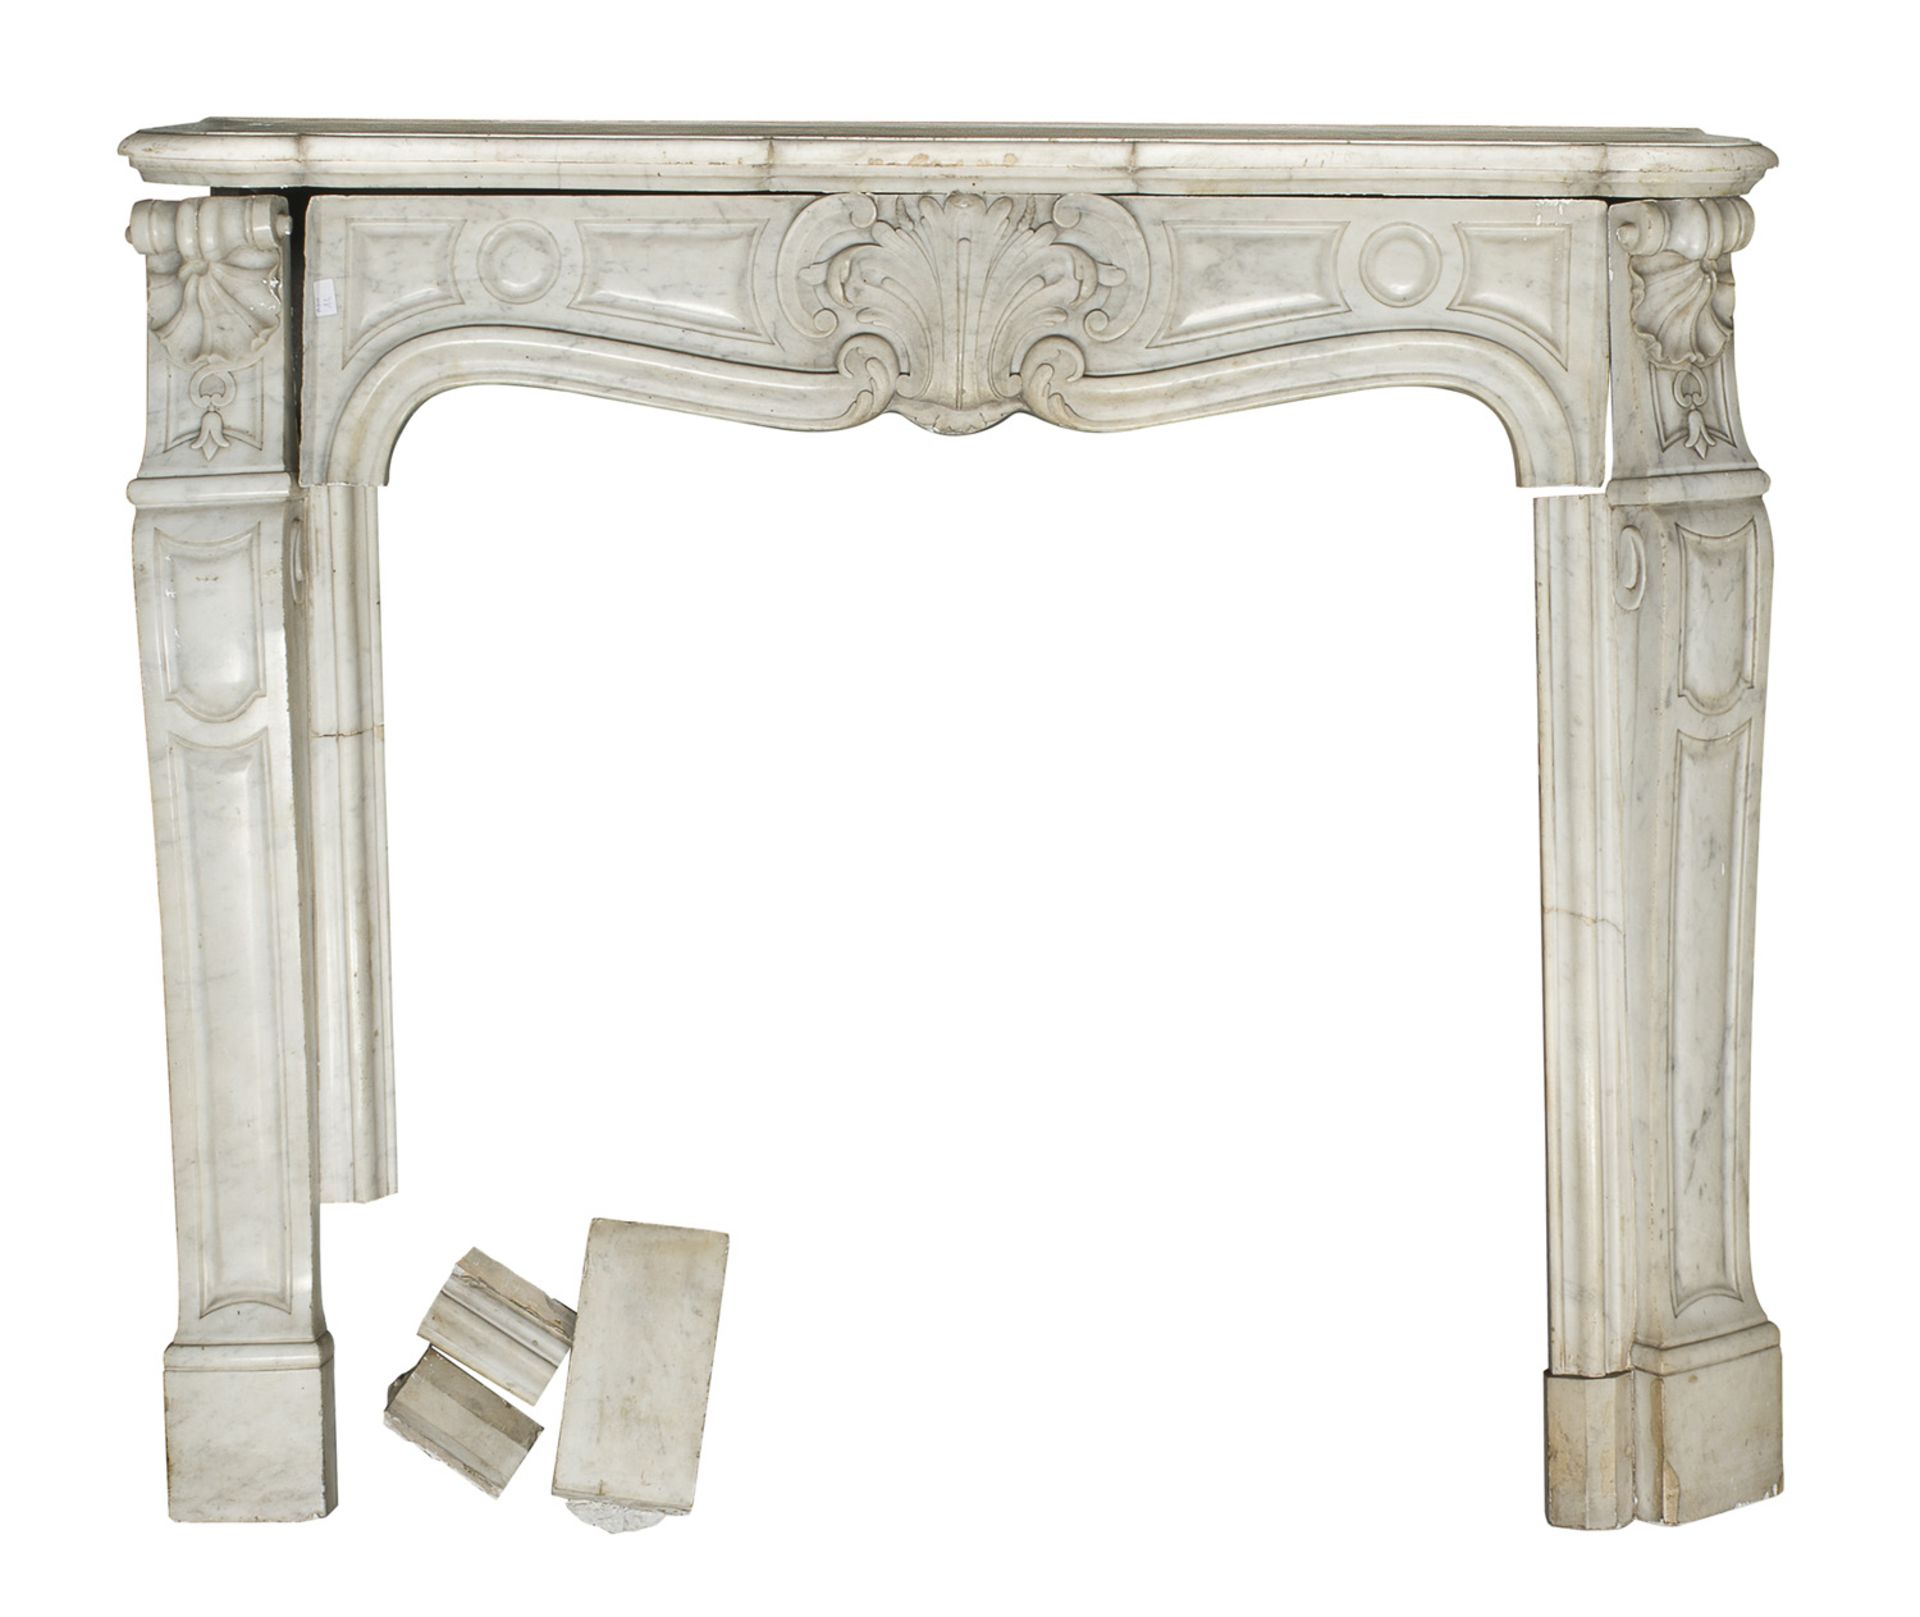 FIREPLACE MANTLE IN WHITE MARBLE EARLY 19TH CENTURY